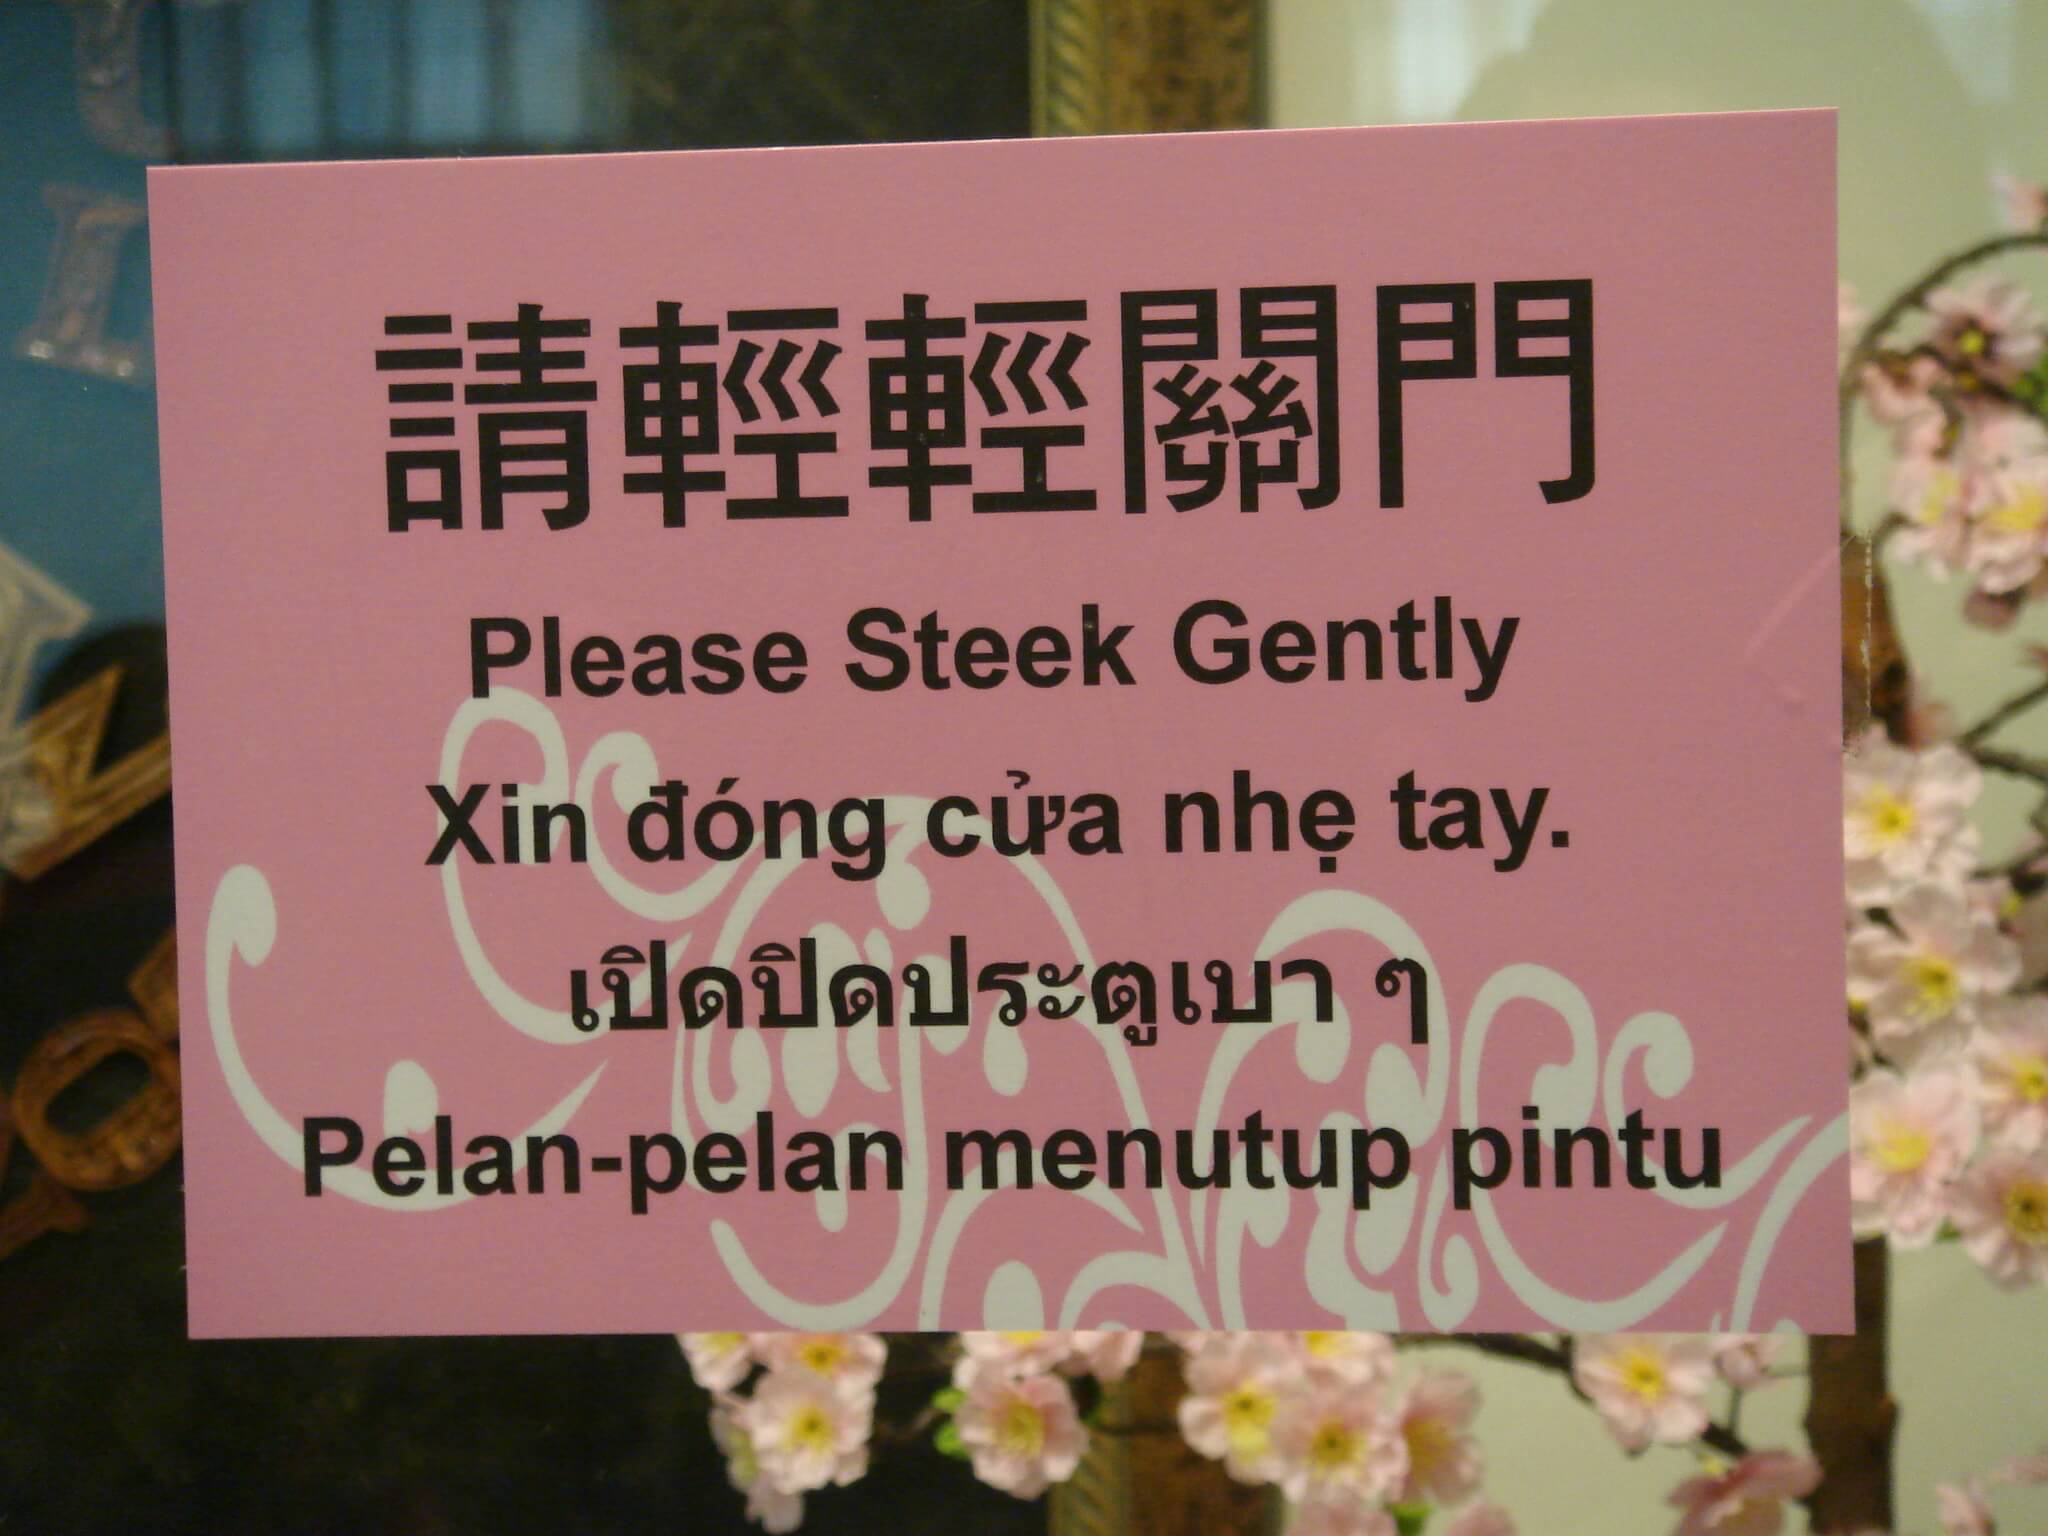 A mistranslated sign, reading "Please Steek Gently"